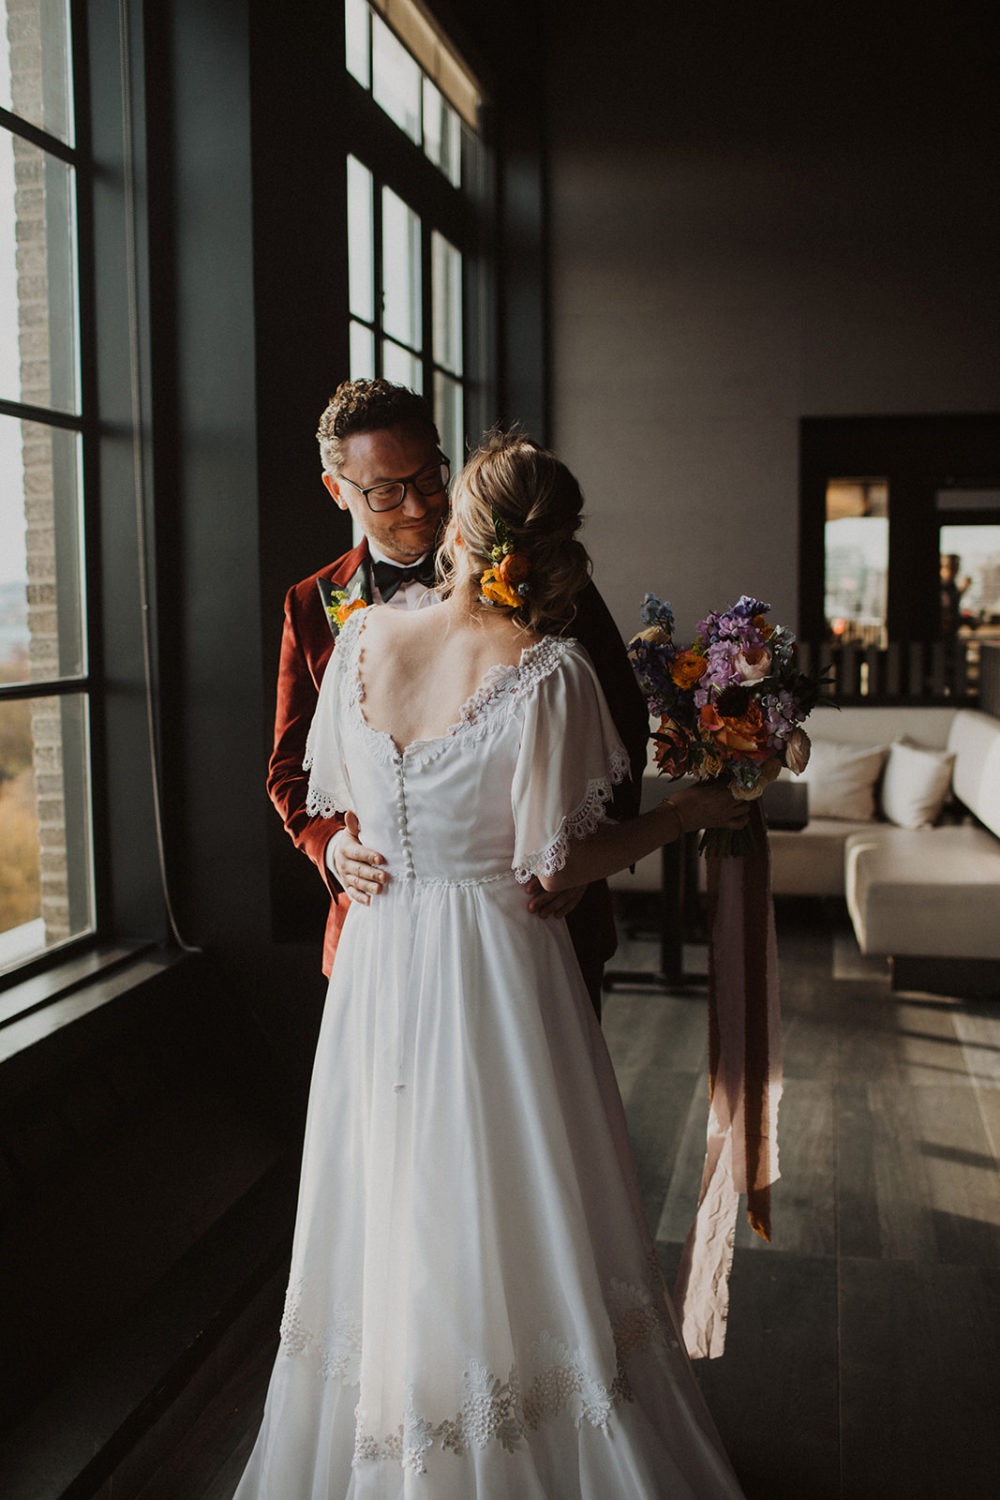 Groom embraces bride during first look